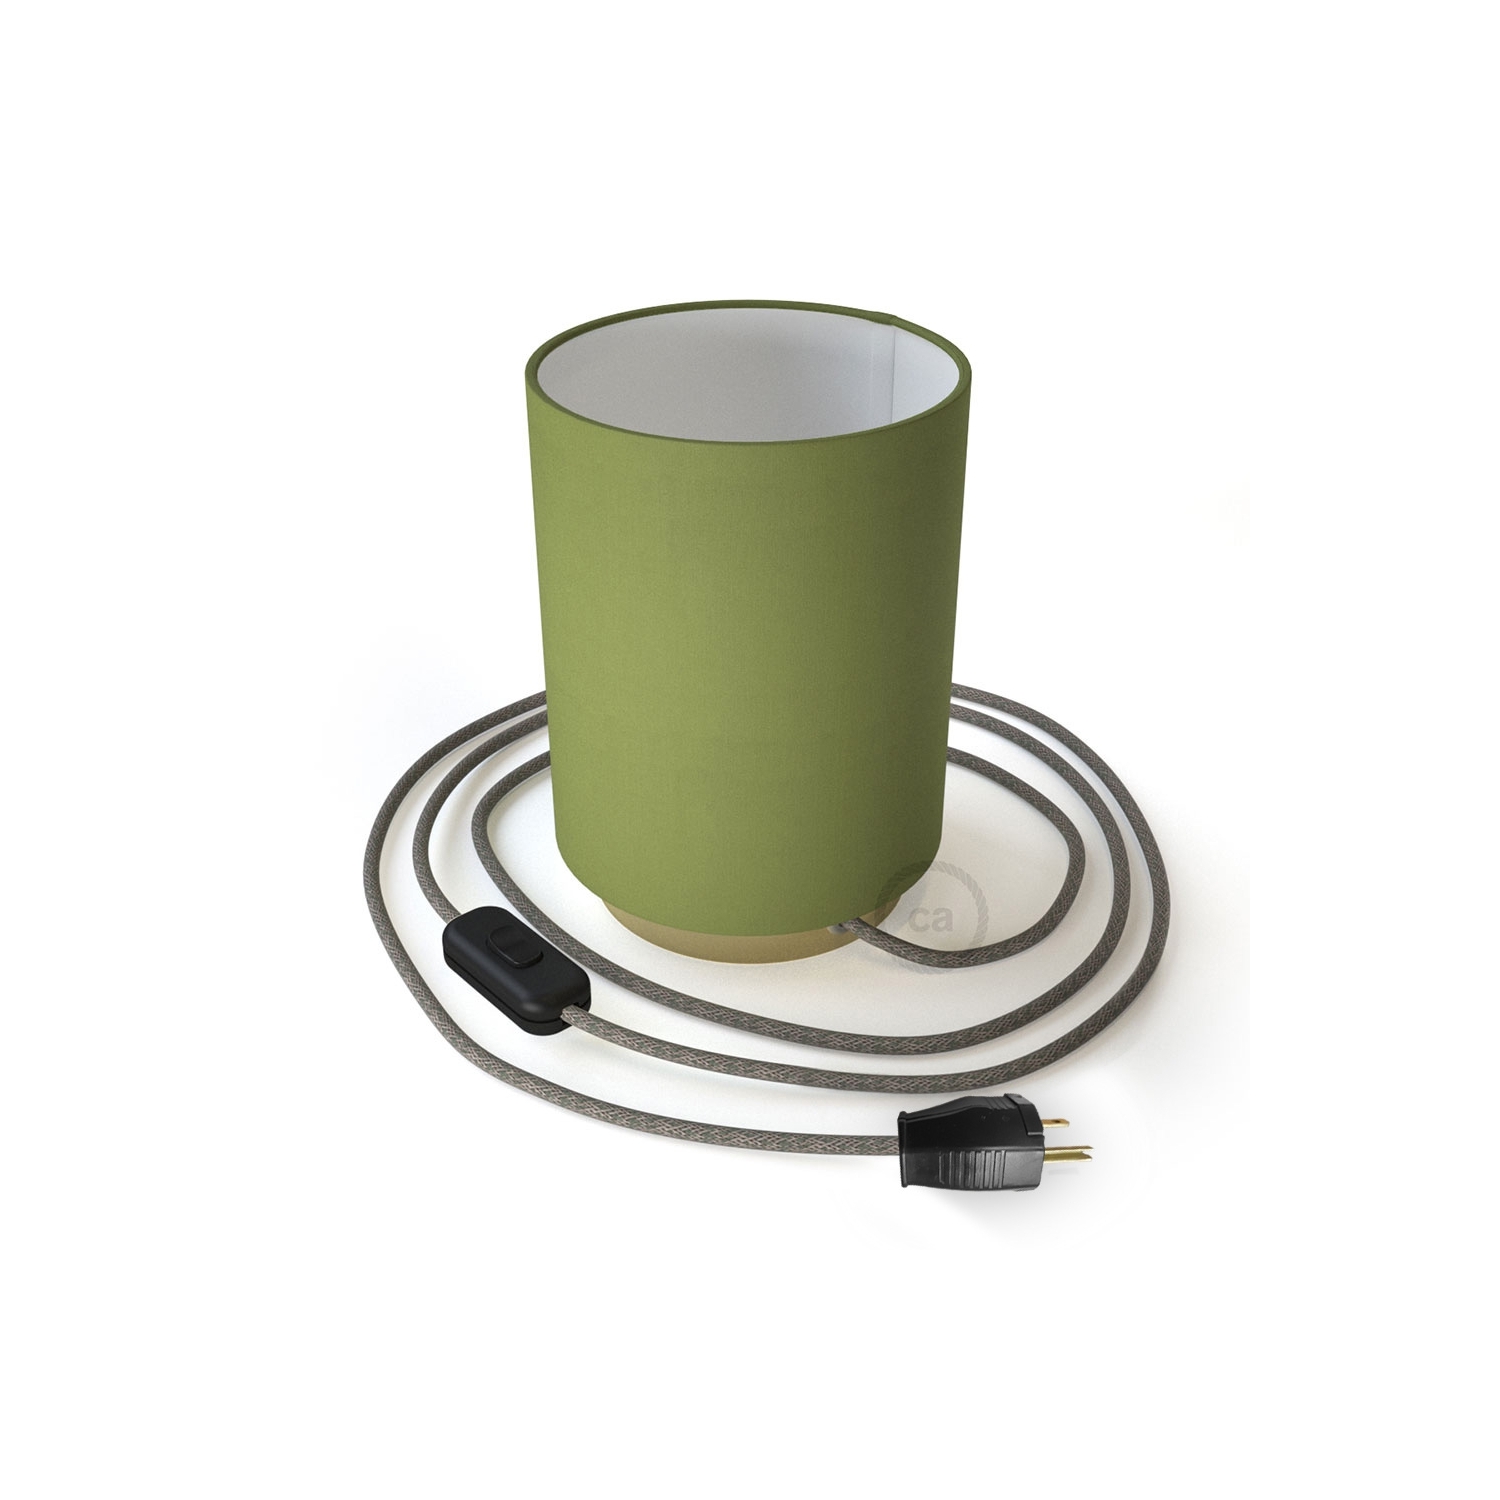 Posaluce with Olive Green Canvas Cylinder lampshade, brass metal, with textile cable, switch and plug